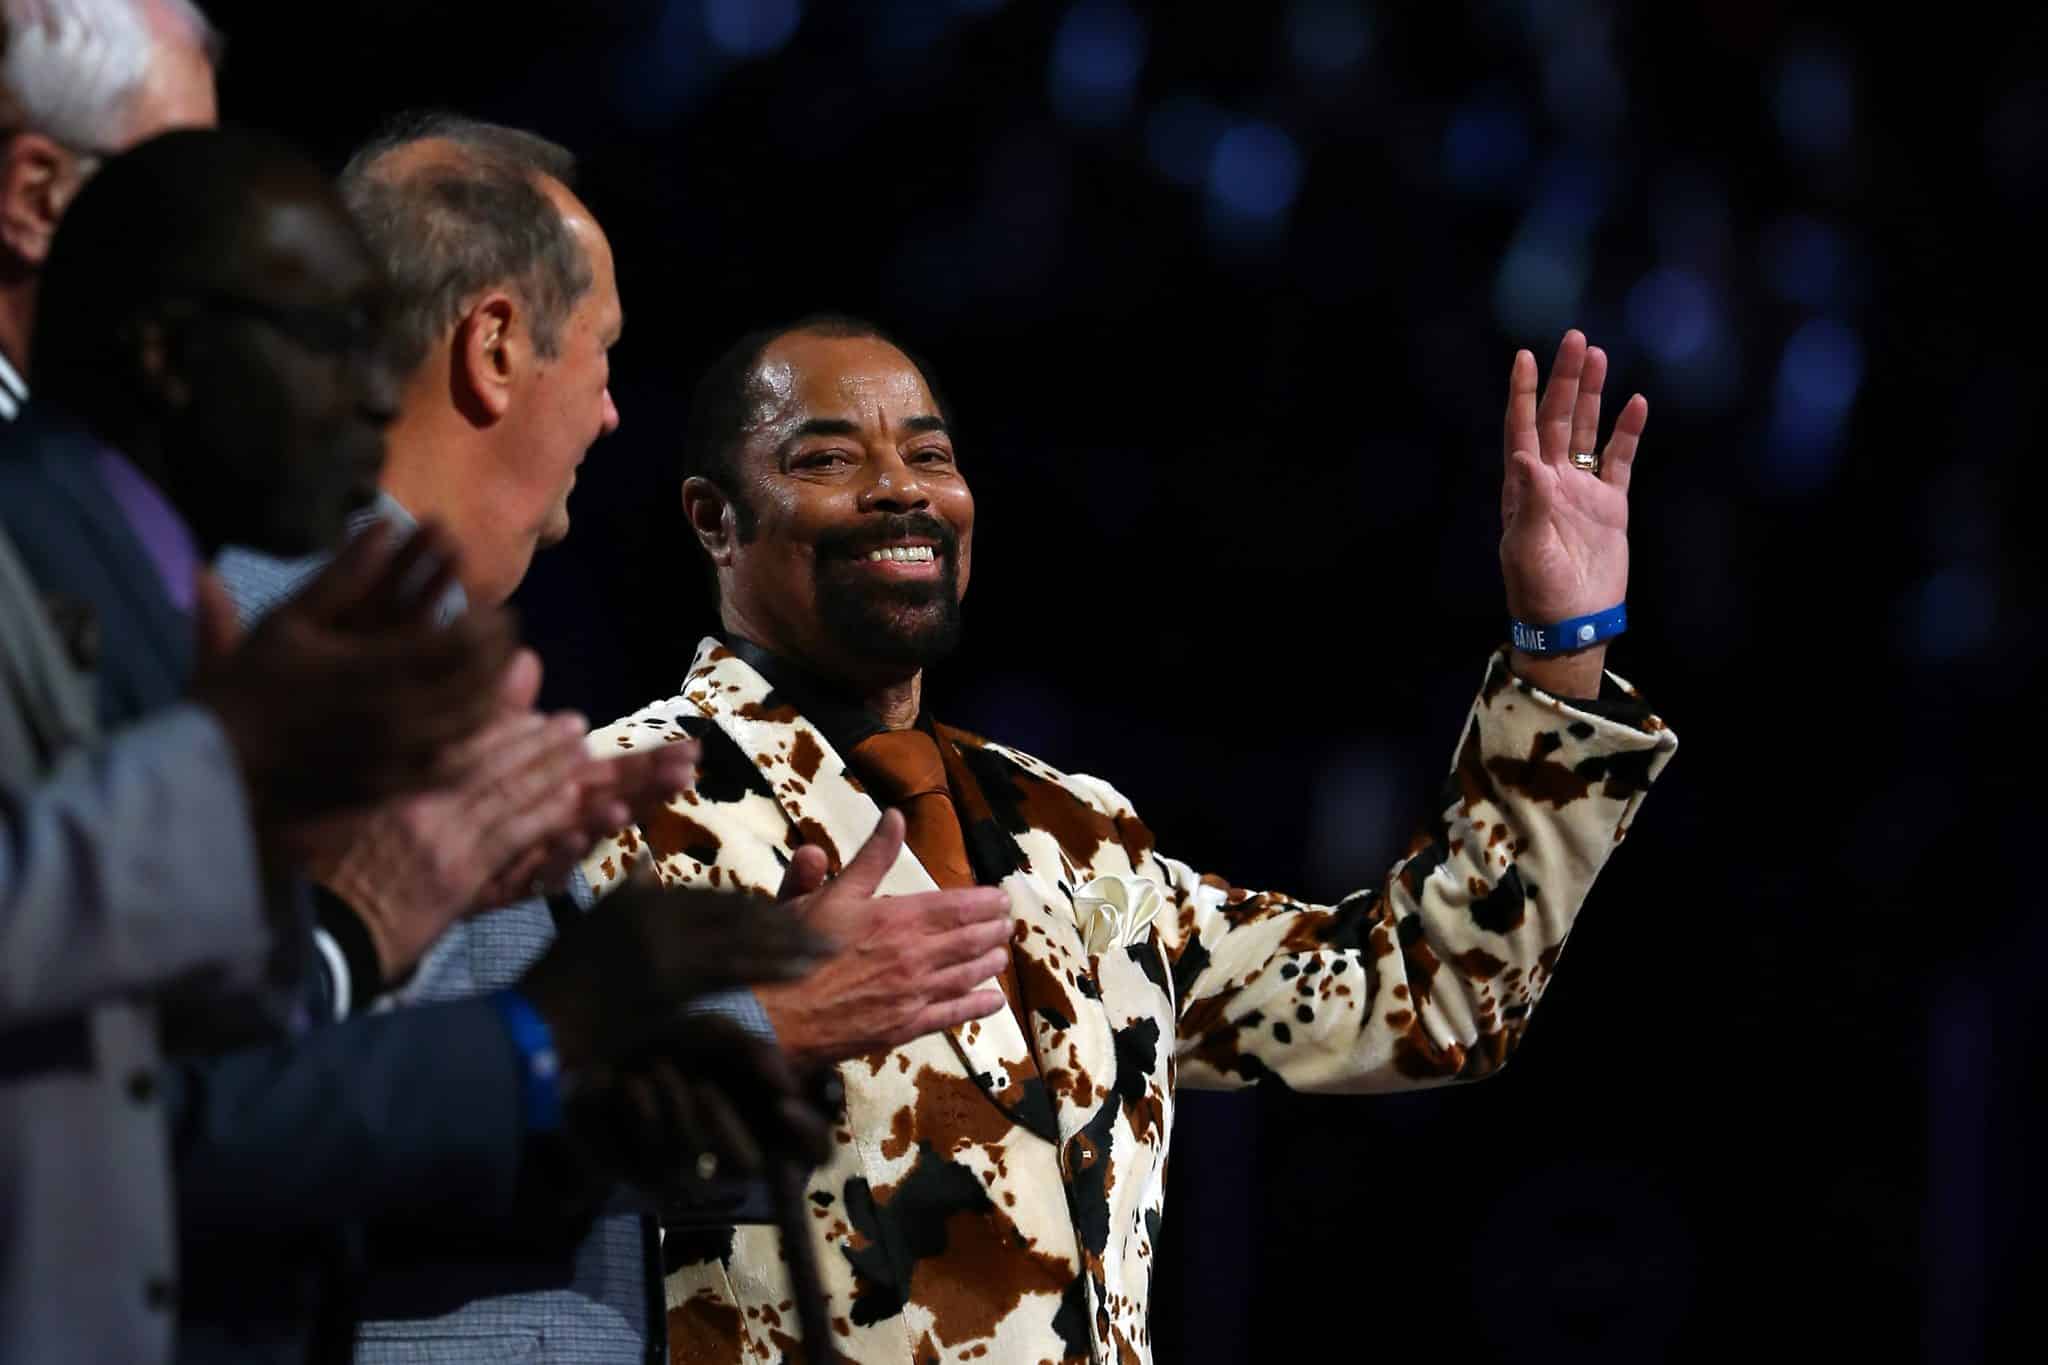 NEW YORK, NY - FEBRUARY 15: New York Knick Legend Walt Frazier waves during the 2015 NBA All-Star Game at Madison Square Garden on February 15, 2015 in New York City. NOTE TO USER: User expressly acknowledges and agrees that, by downloading and/or using this photograph, user is consenting to the terms and conditions of the Getty Images License Agreement.